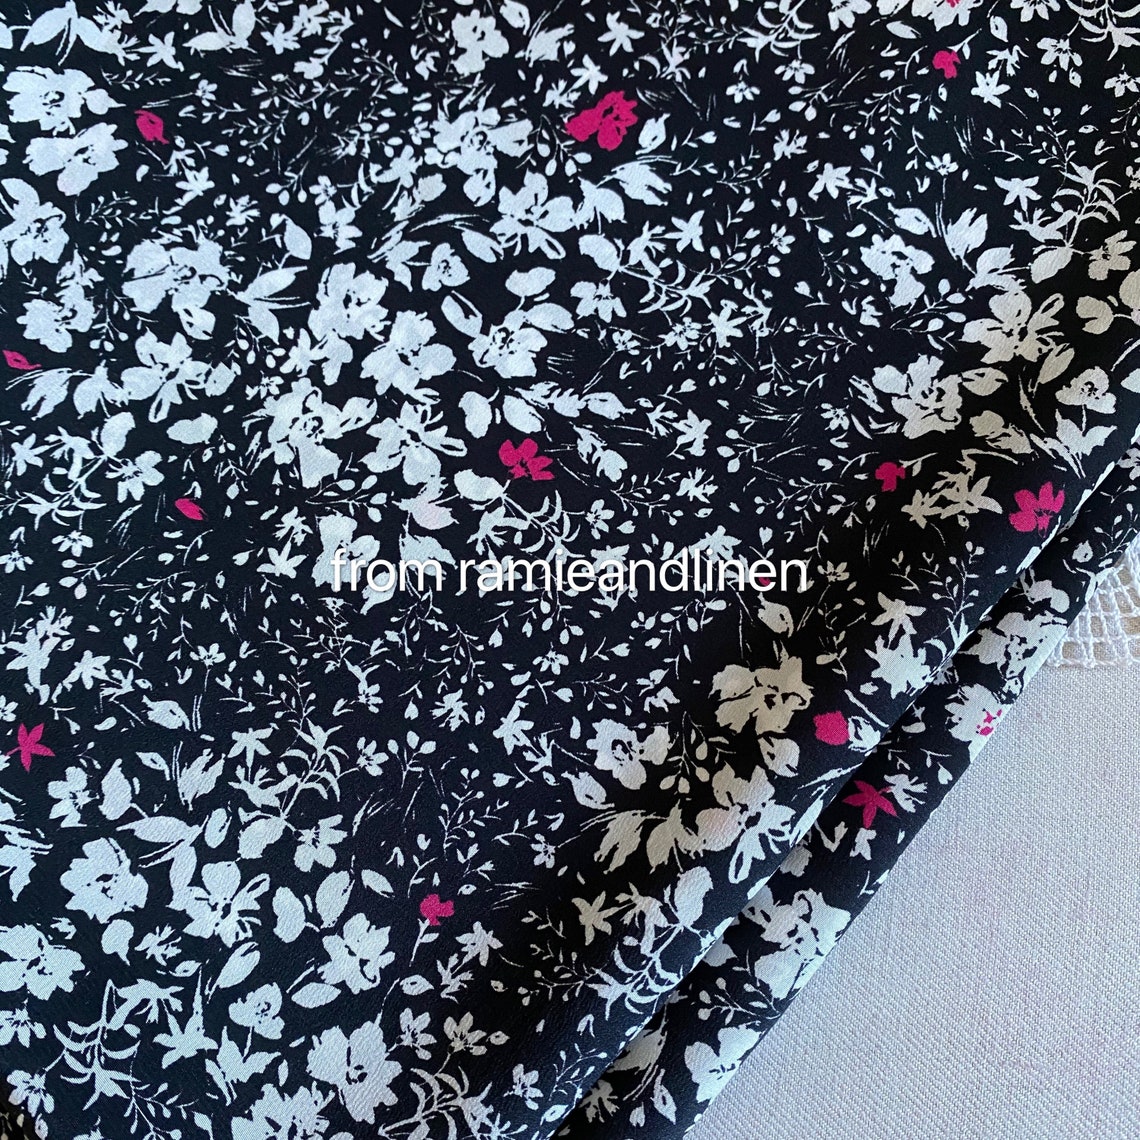 Silk fabric vintage style white and pink flowers on black | Etsy